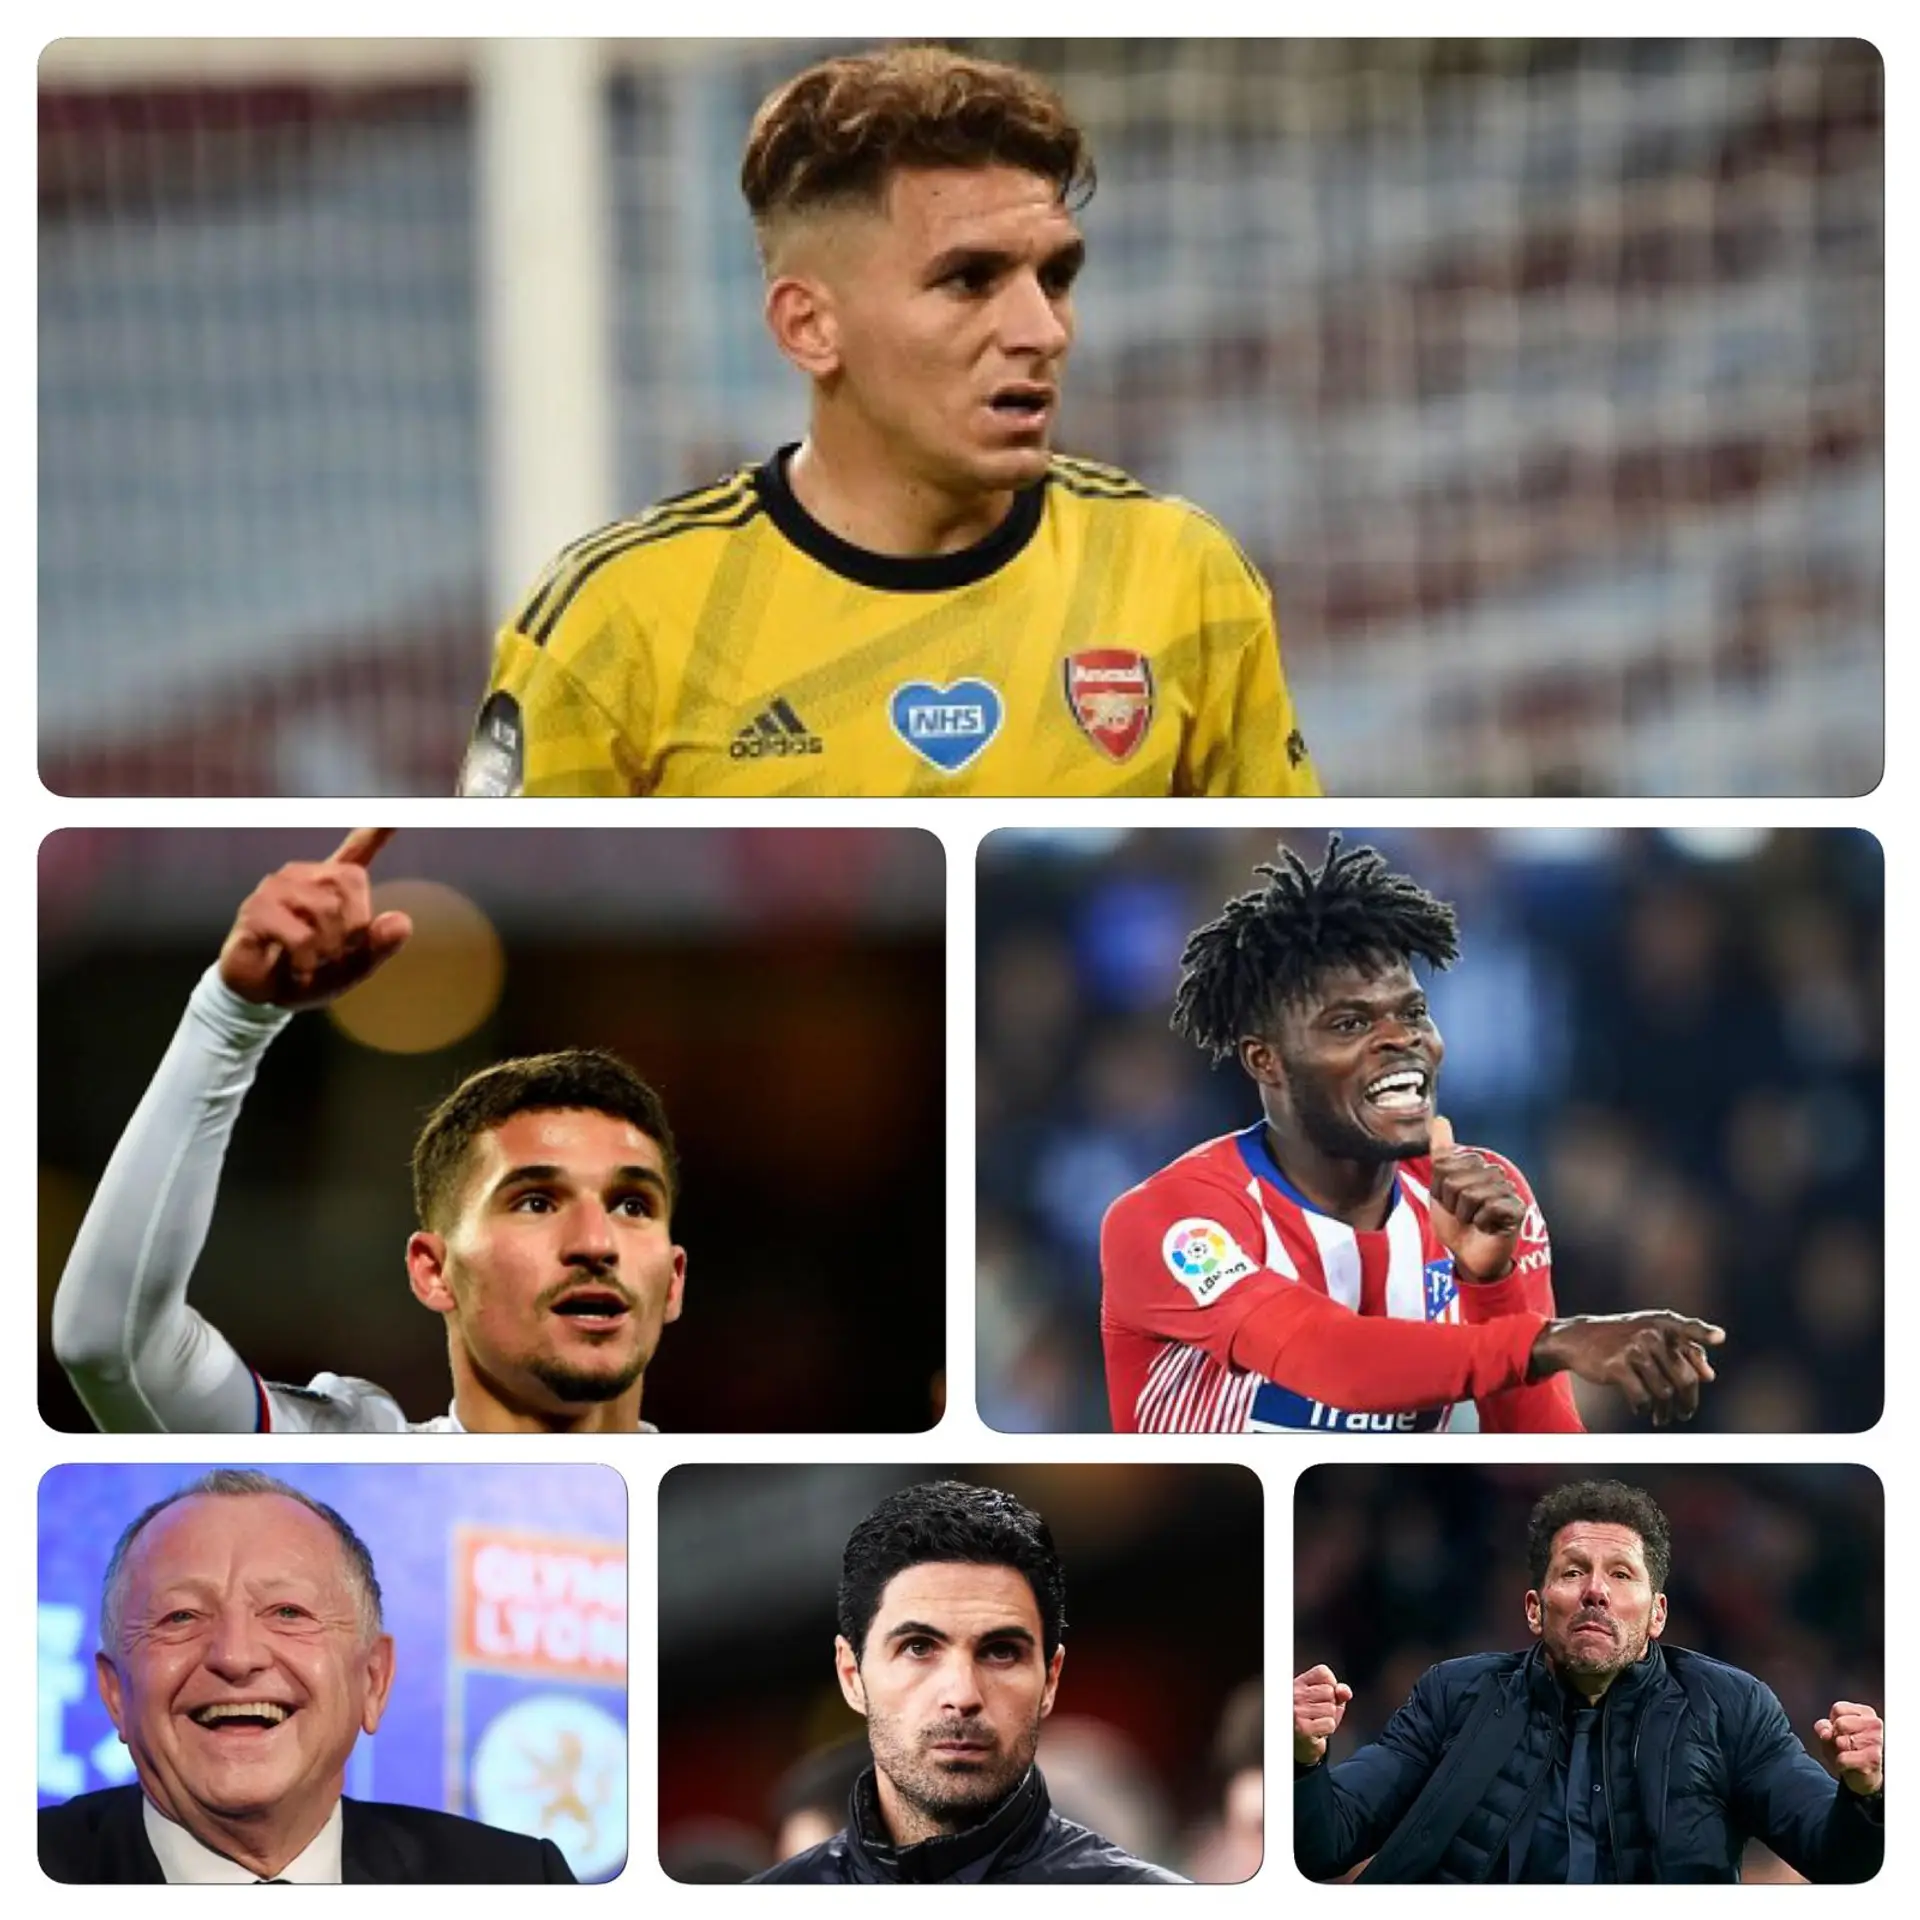 Simeone's playing sly waiting game with Arsenal or why Partey-Torreira swap deal possible